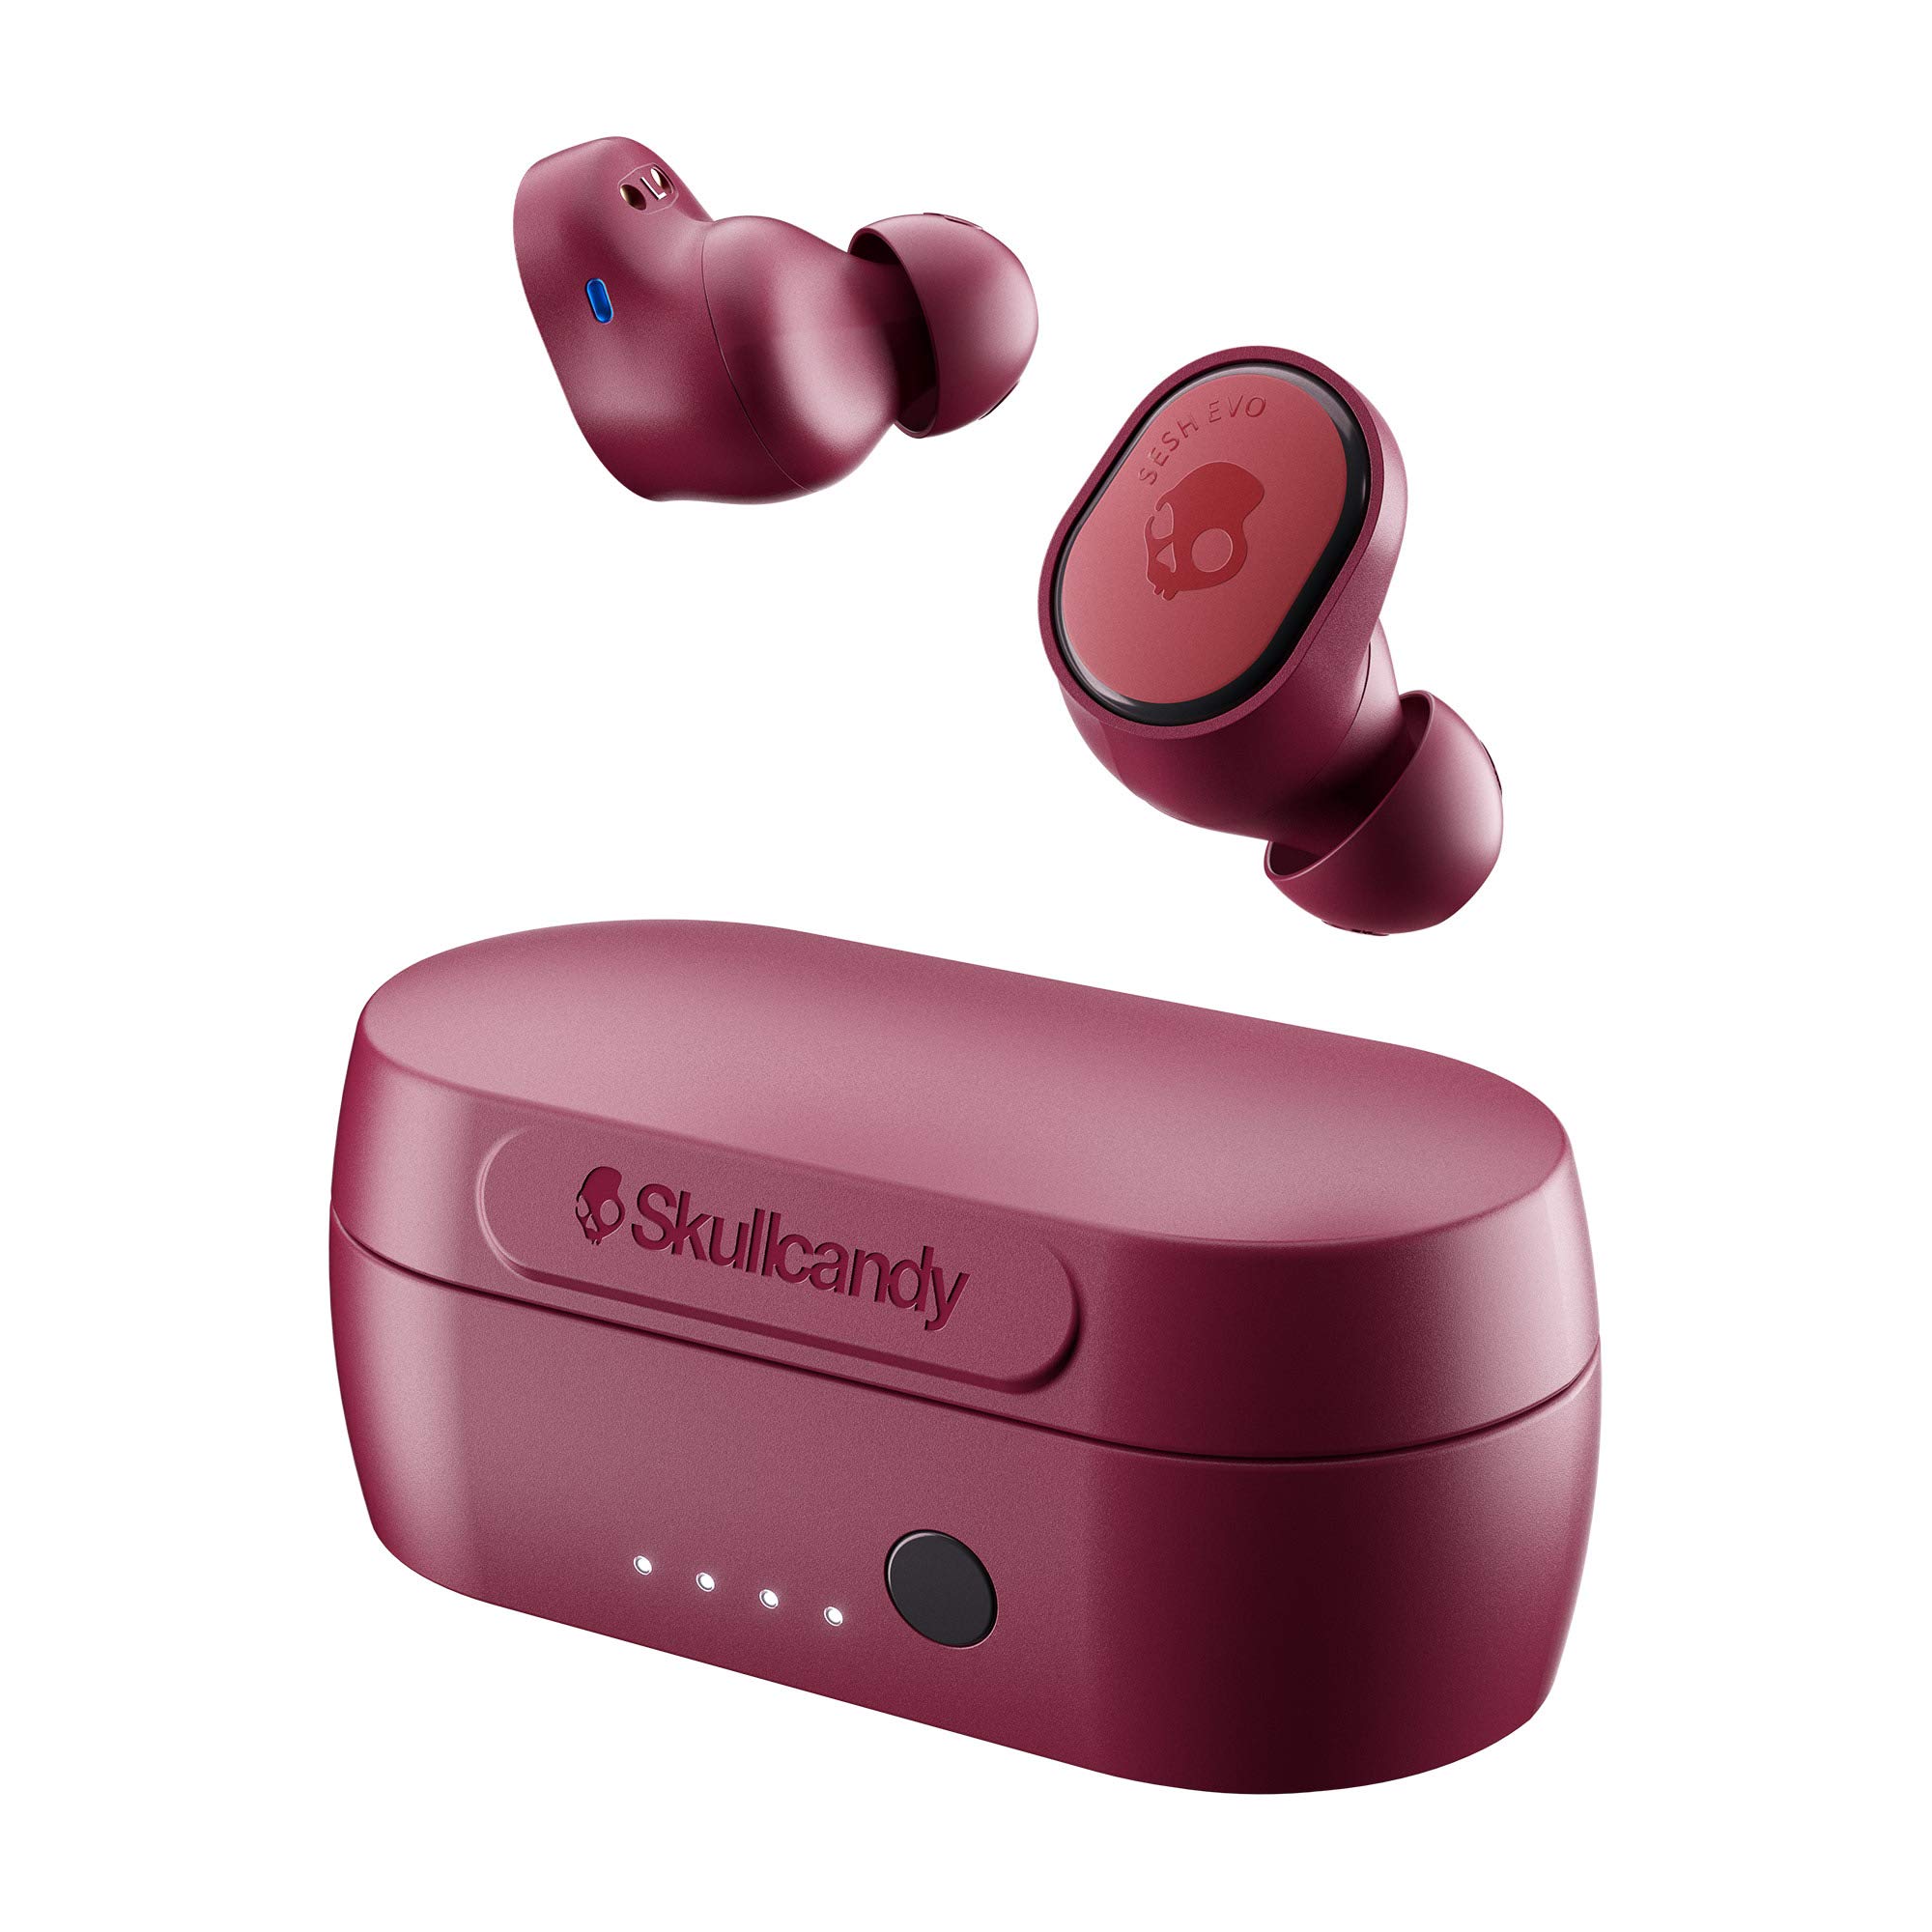 Skullcandy Sesh Evo True Wireless In-Ear Bluetooth Earbuds Compatible with iPhone and Android / Charging Case and Microphone / Great for Gym, Sports, and Gaming IP55 Water Dust Resistant - Red